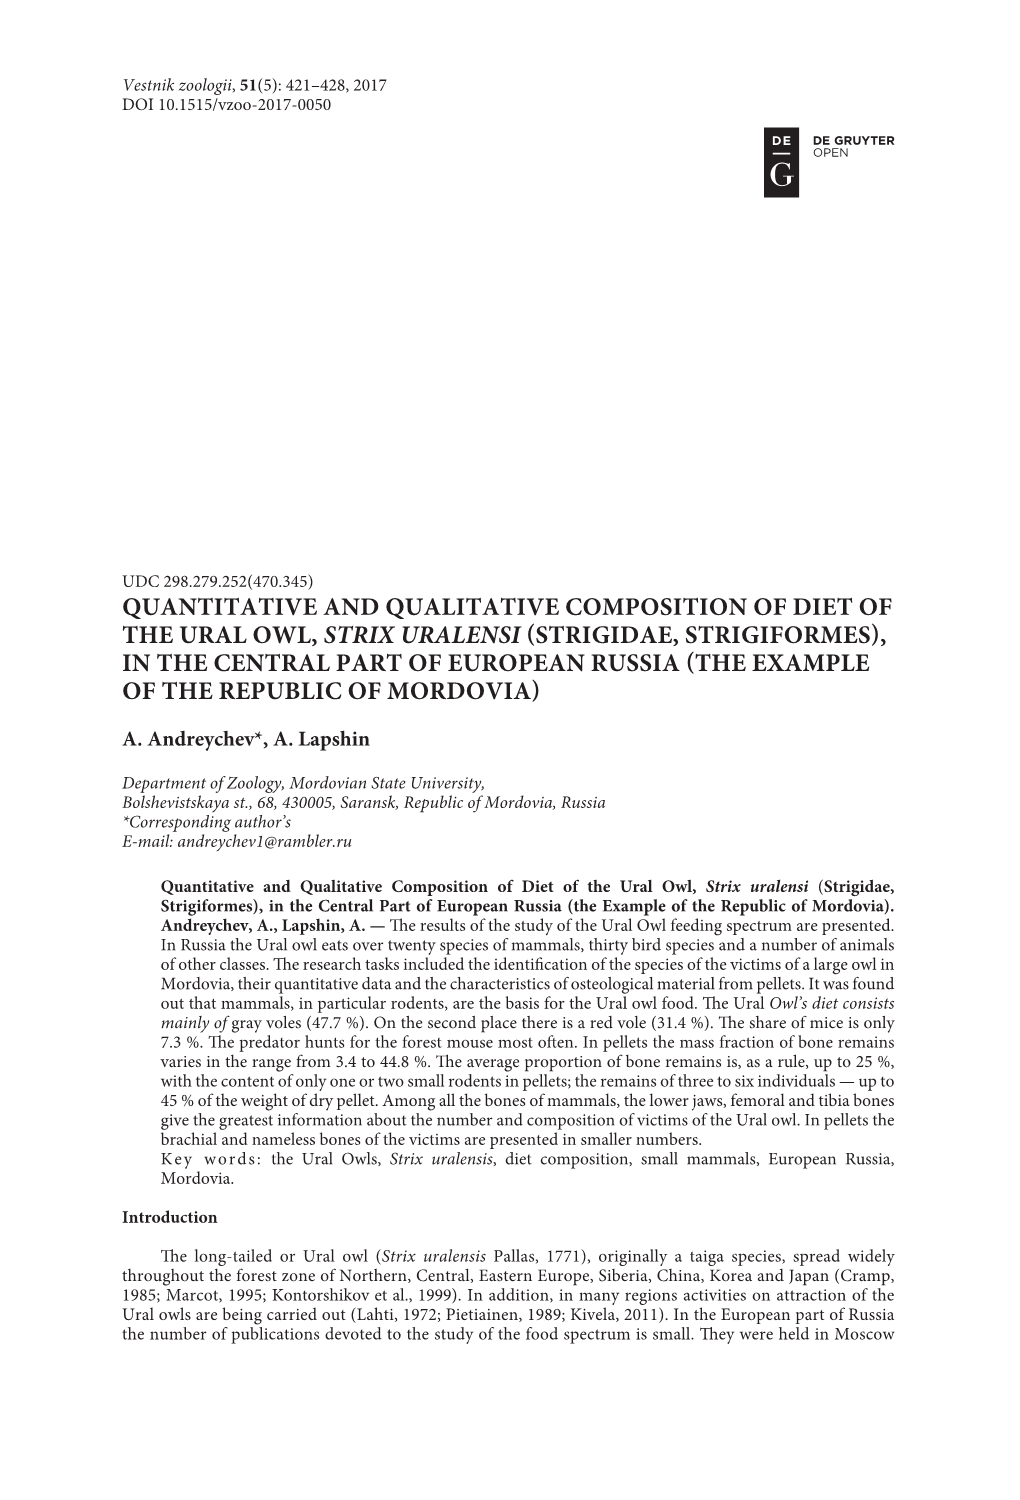 Quantitative and Qualitative Composition of Diet of The